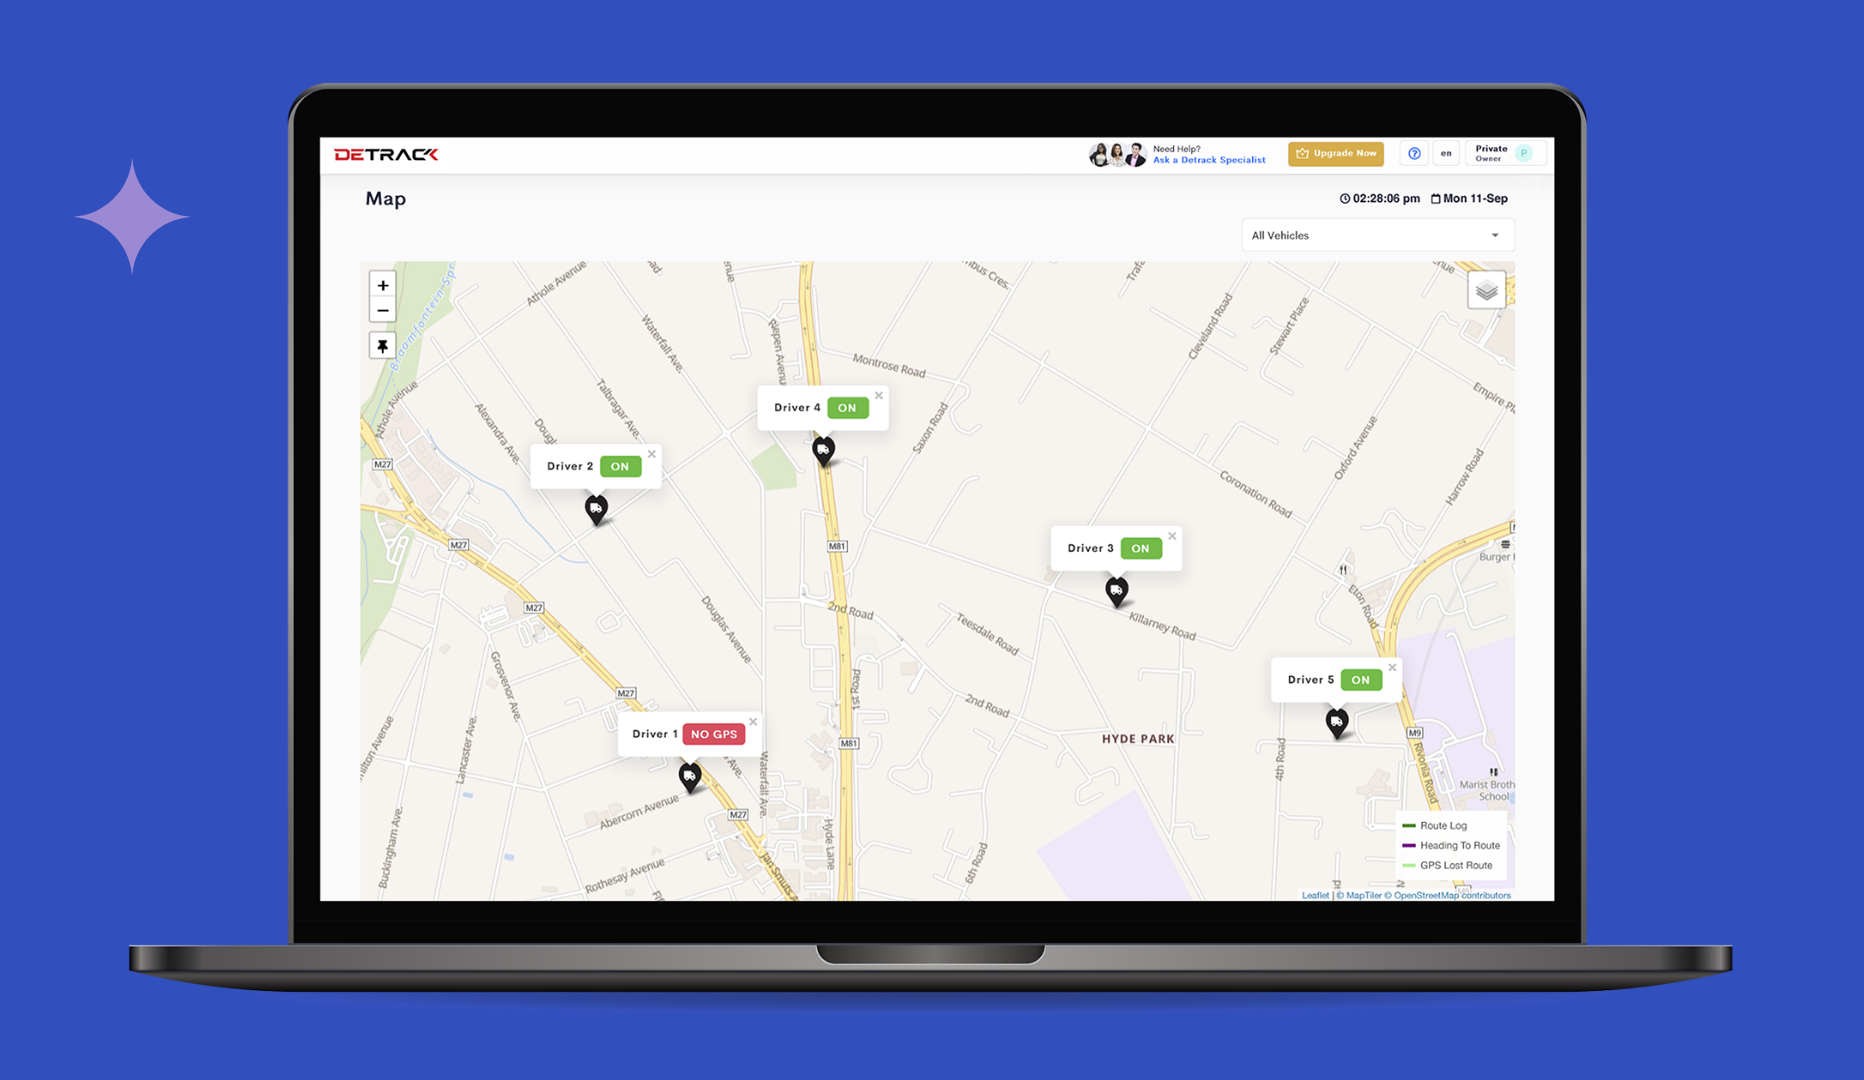 Track the real-time location of each of your vehicles on a unified live map